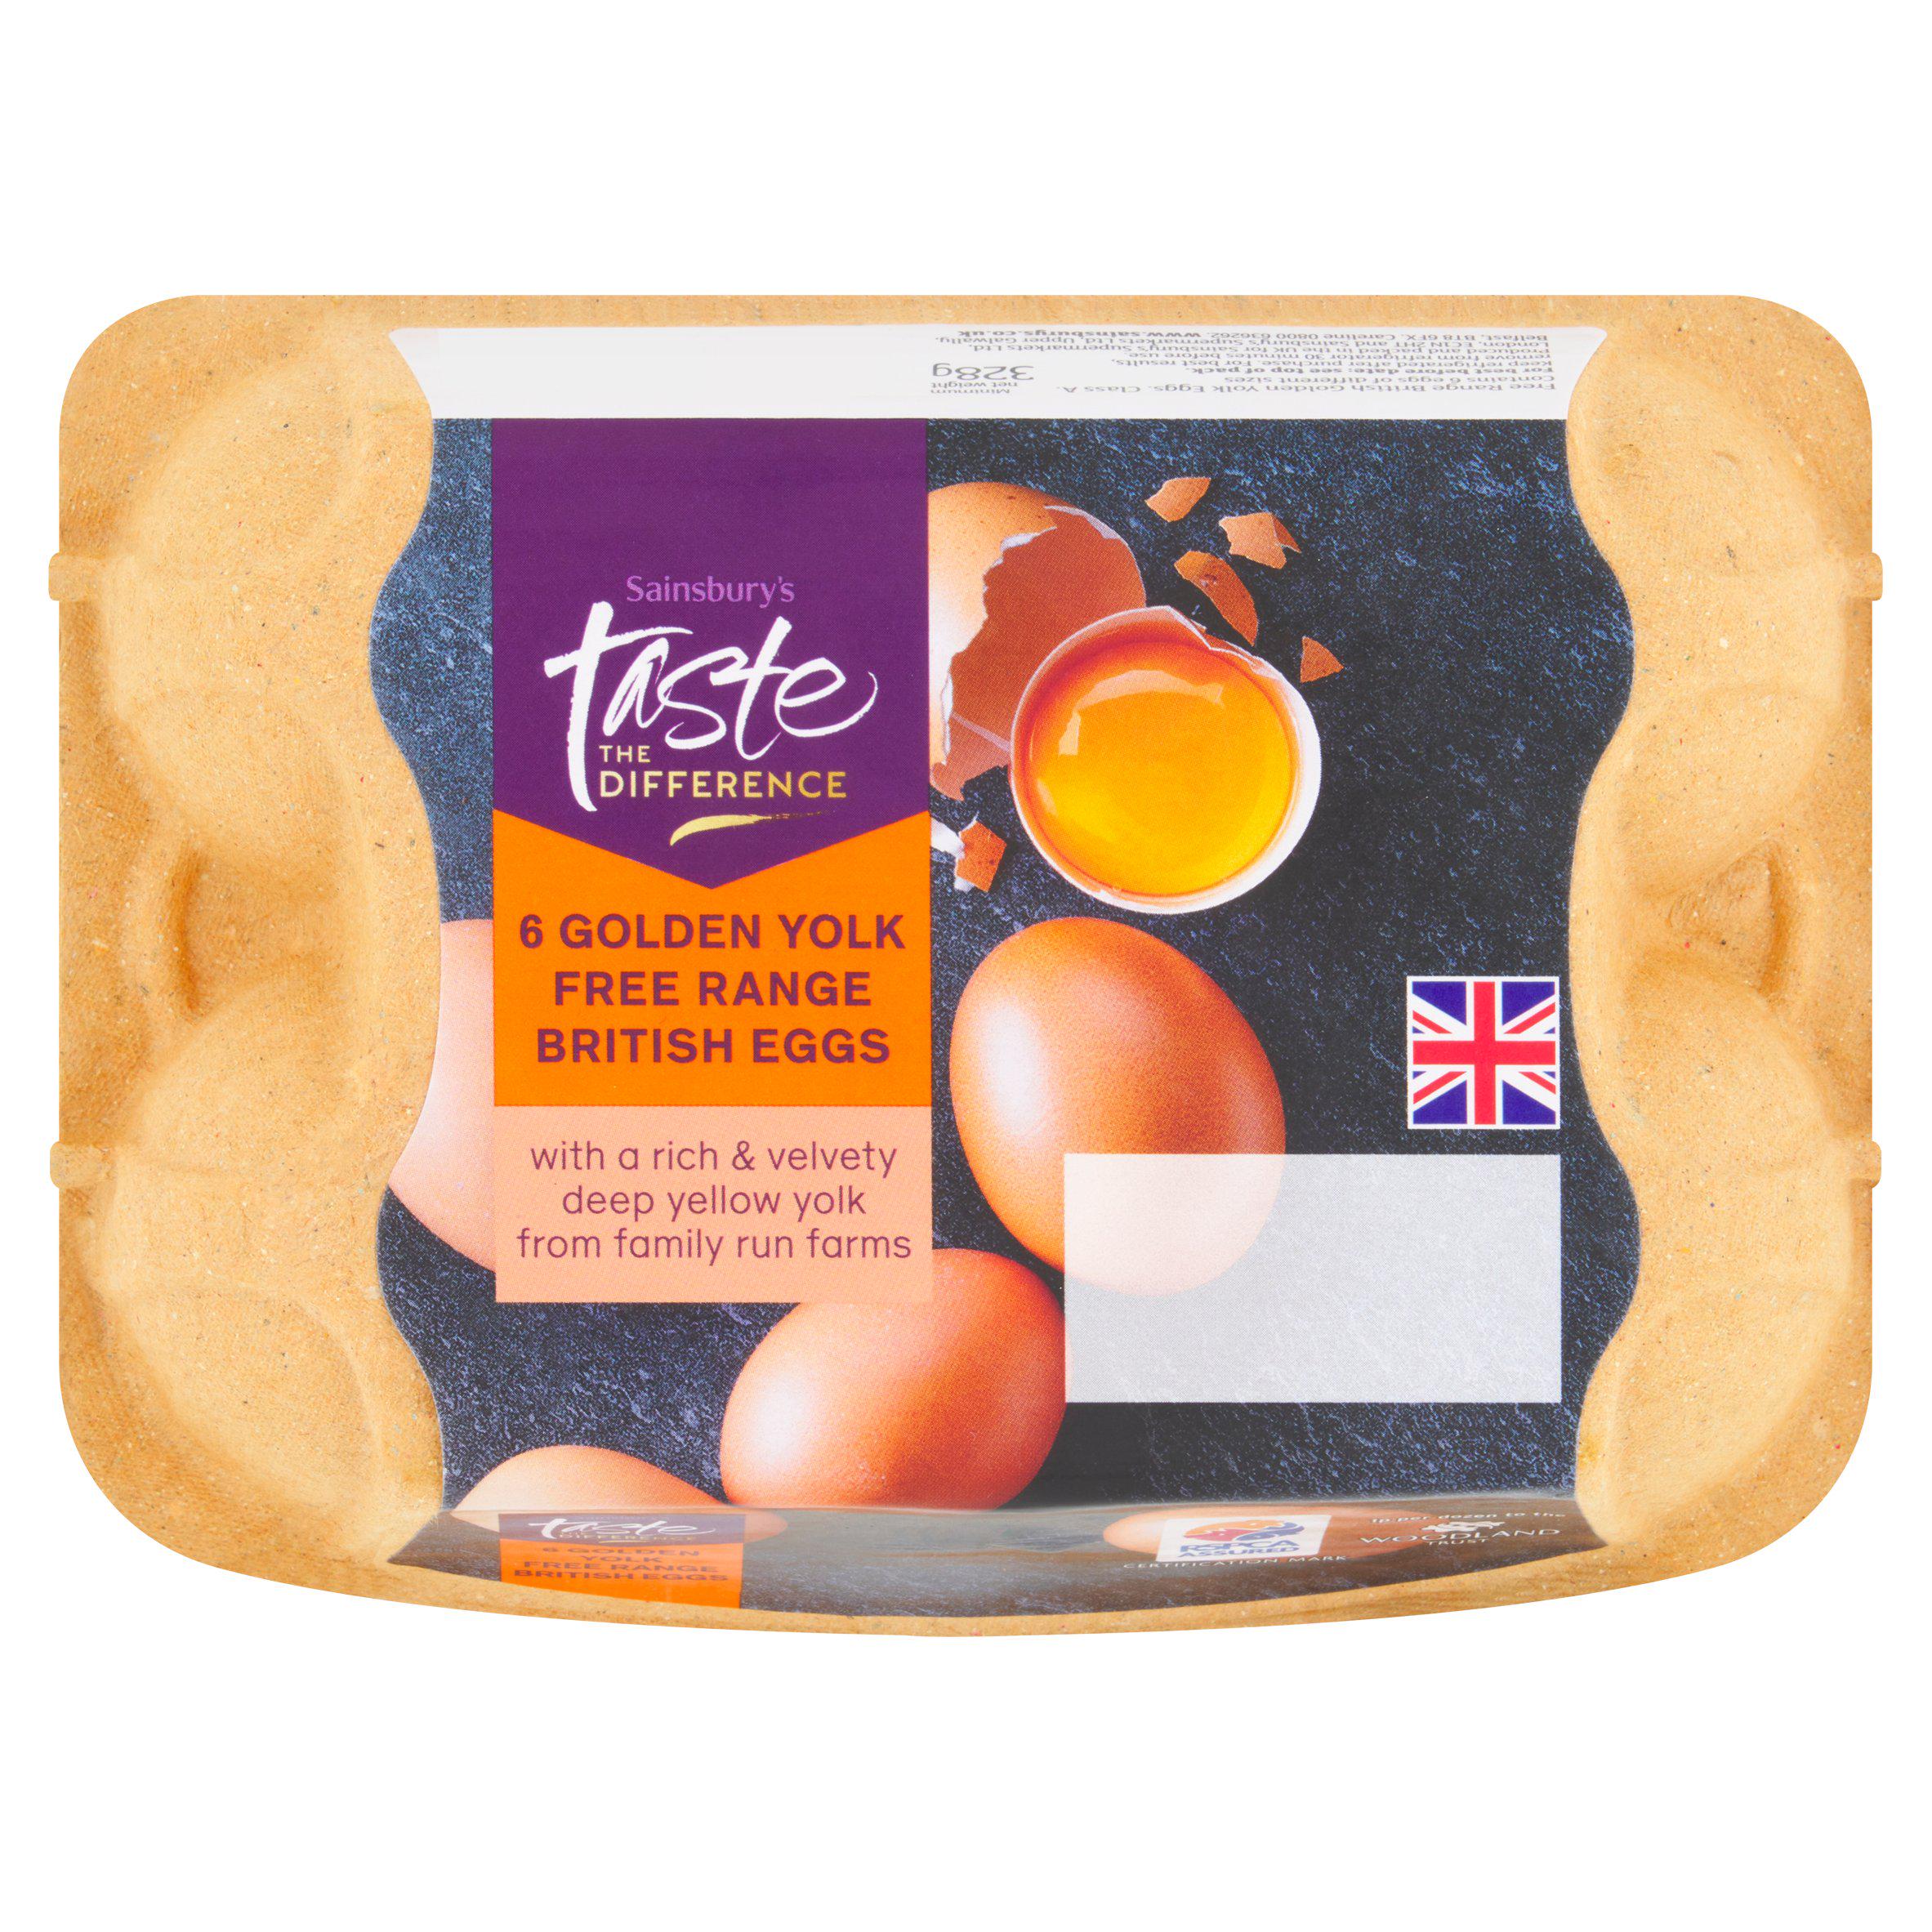 Sainsbury's Woodland Free Range Golden Yolked Mixed Weight Eggs, Taste the Difference x6